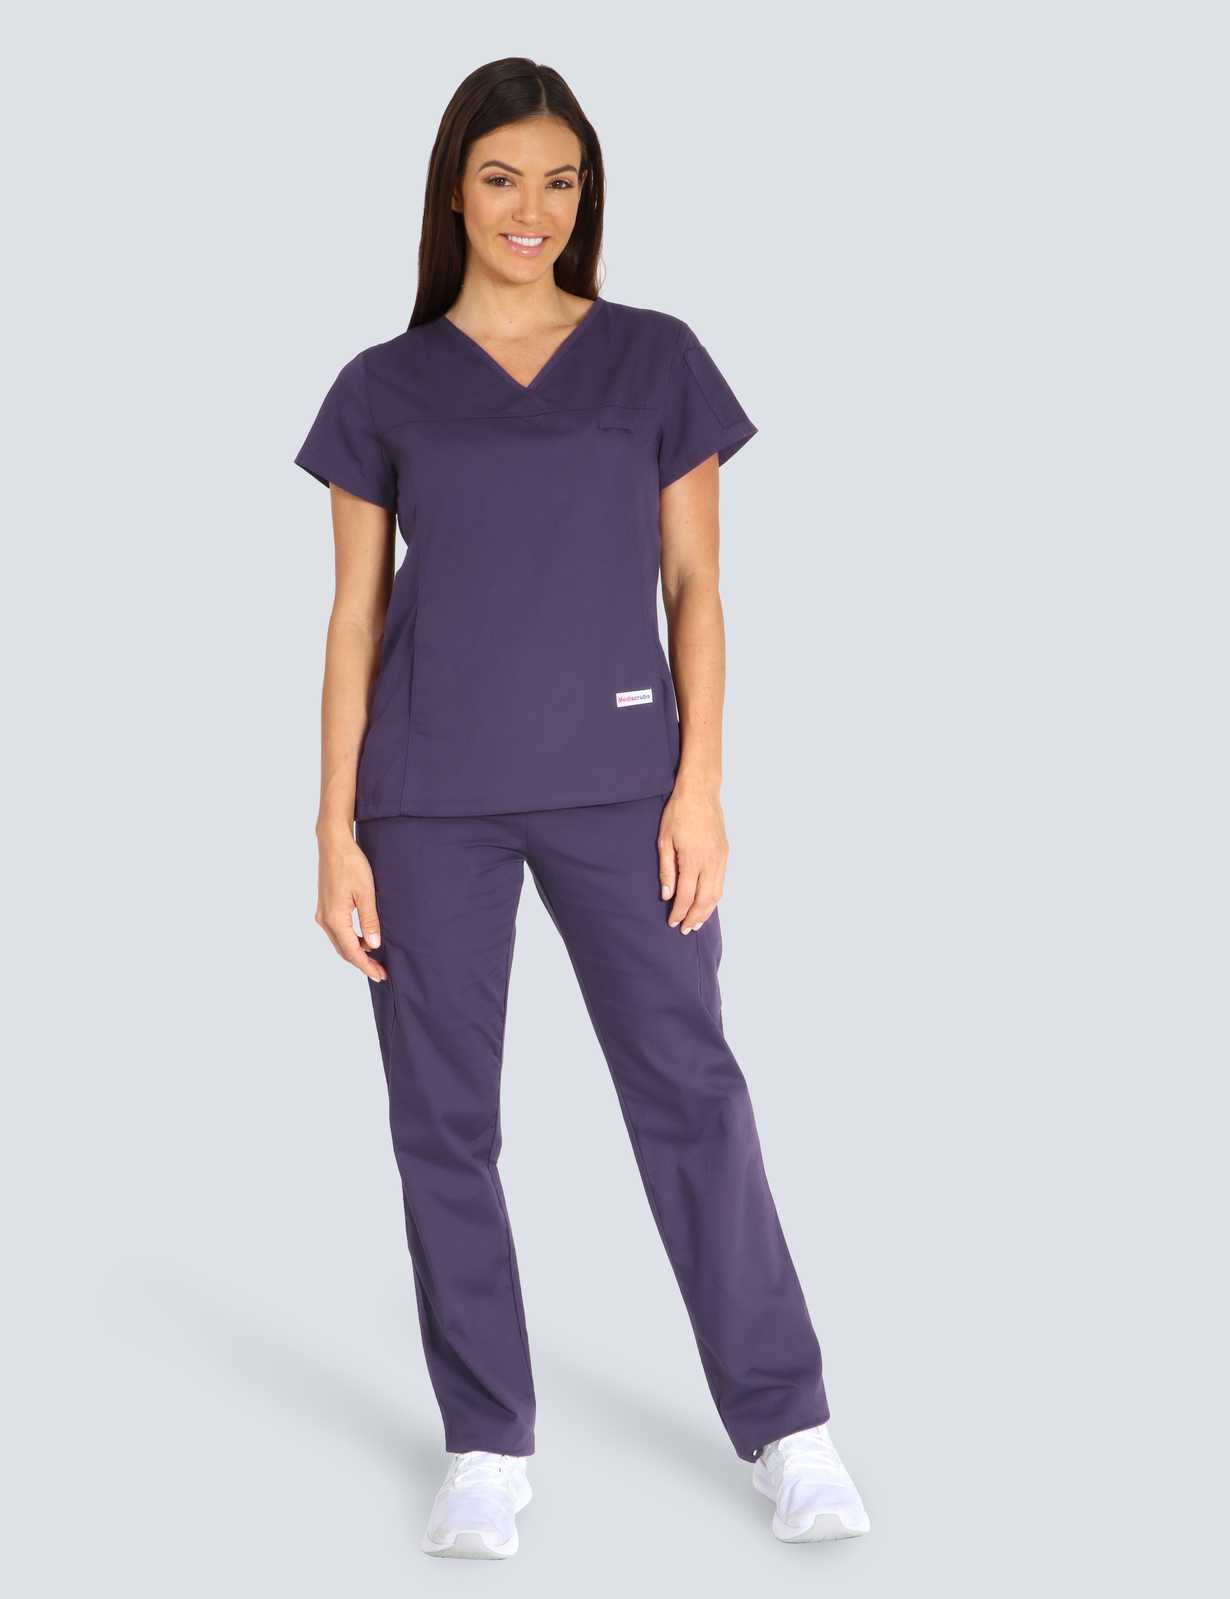 Peninsula Health - Dialysis ANUM (Women's Fit Solid Scrub Top and Cargo Pants in Aubergine incl Logos)